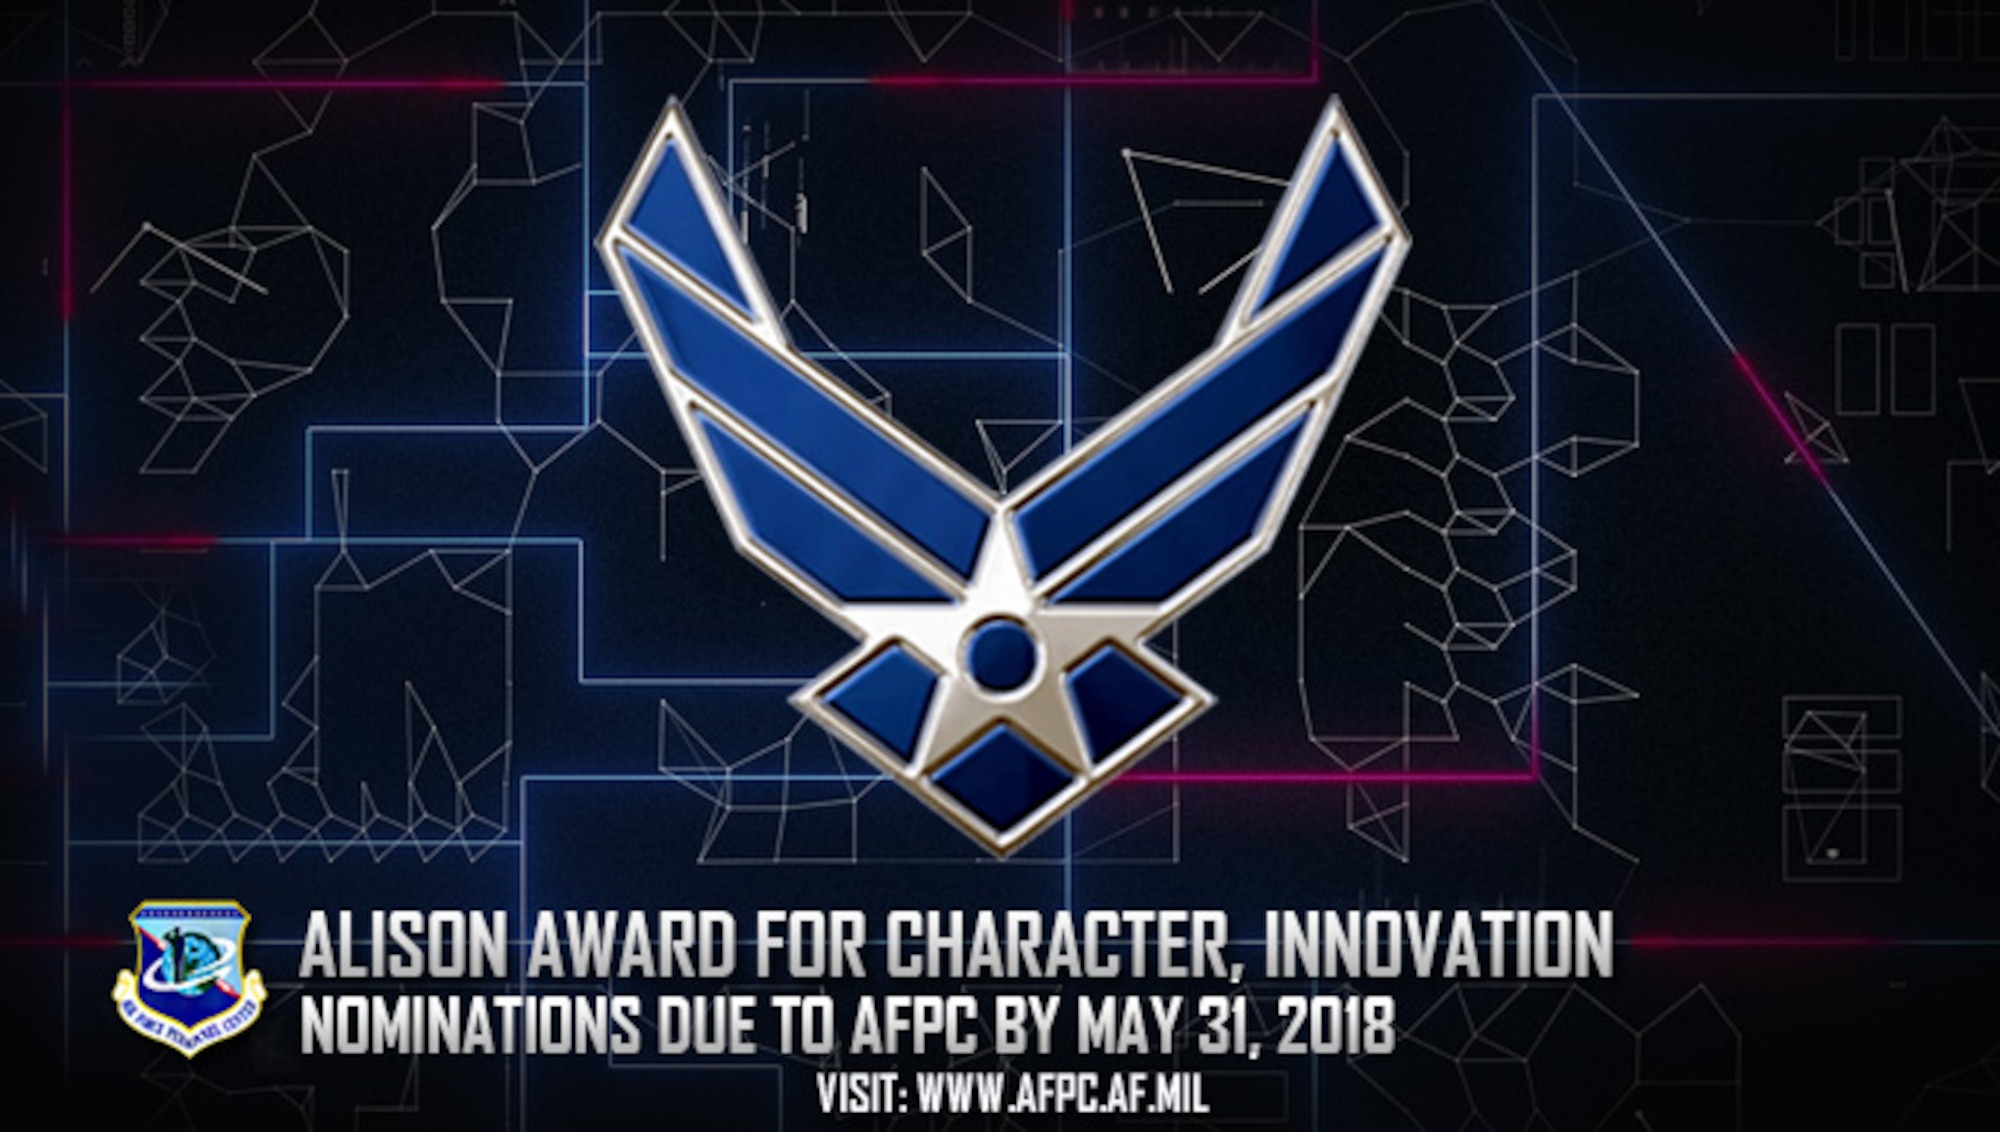 Nomination window open for 2018 USAF Alison Award for Character and Innovation